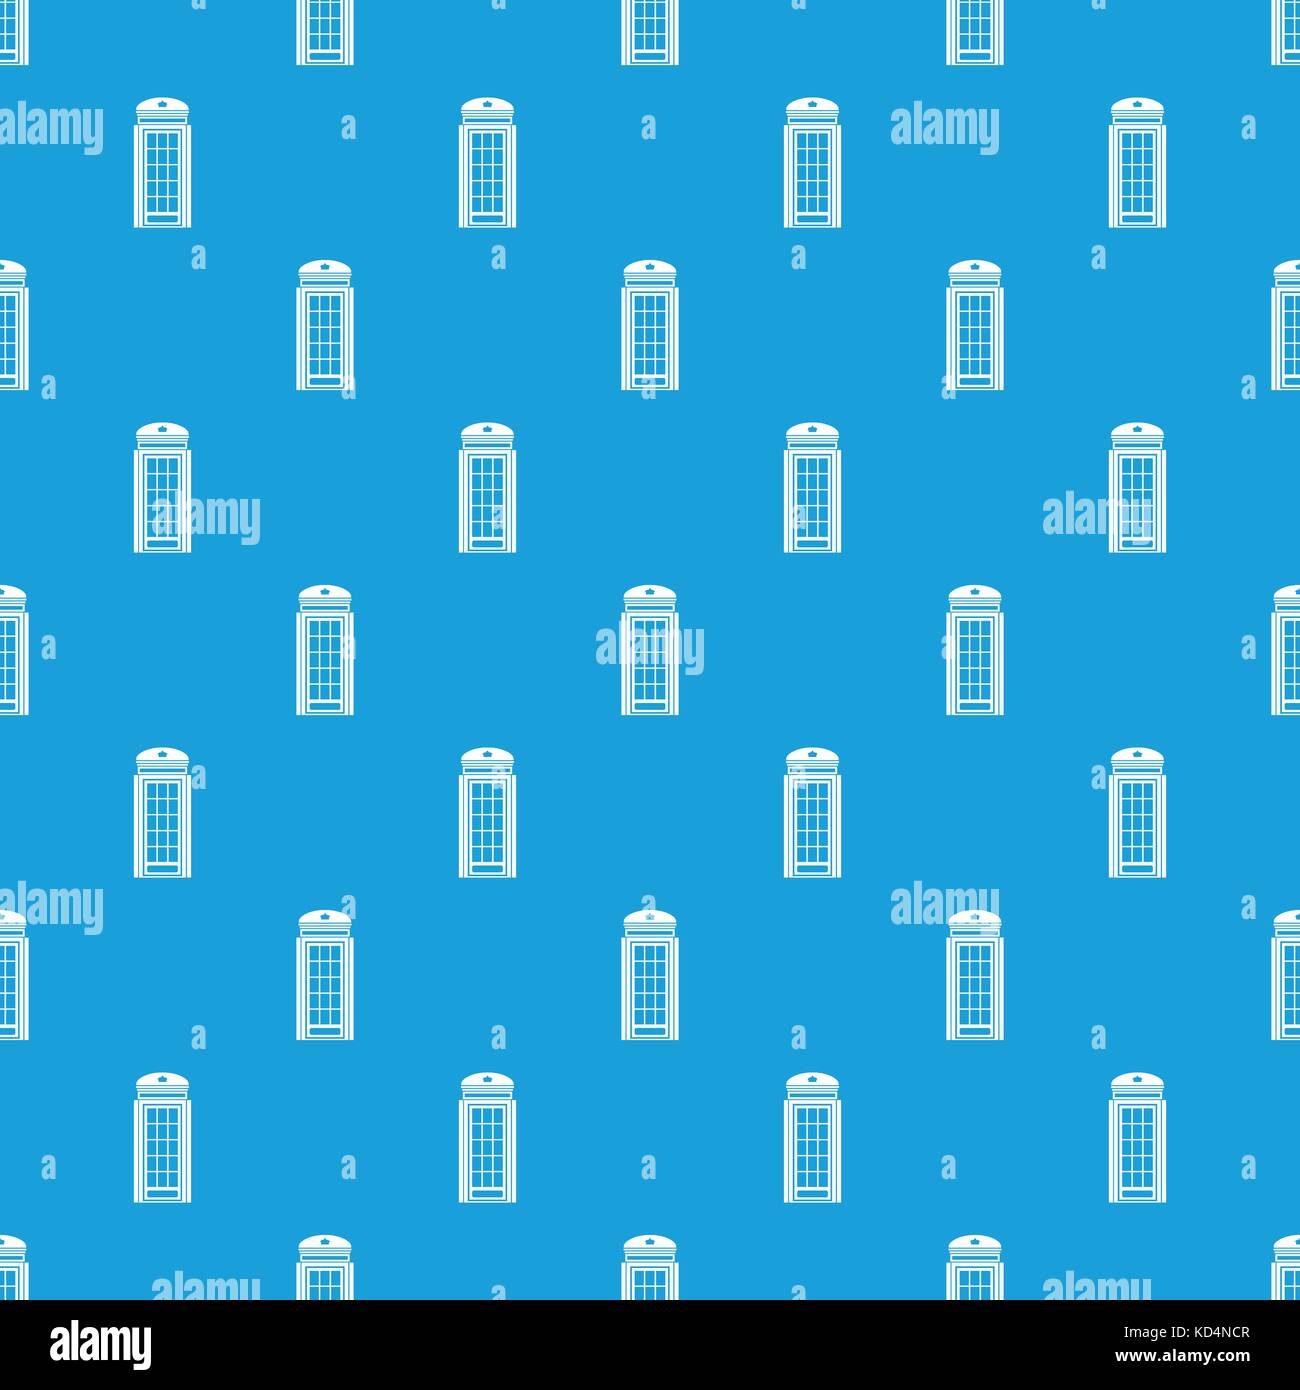 Phone booth pattern seamless blue Stock Vector